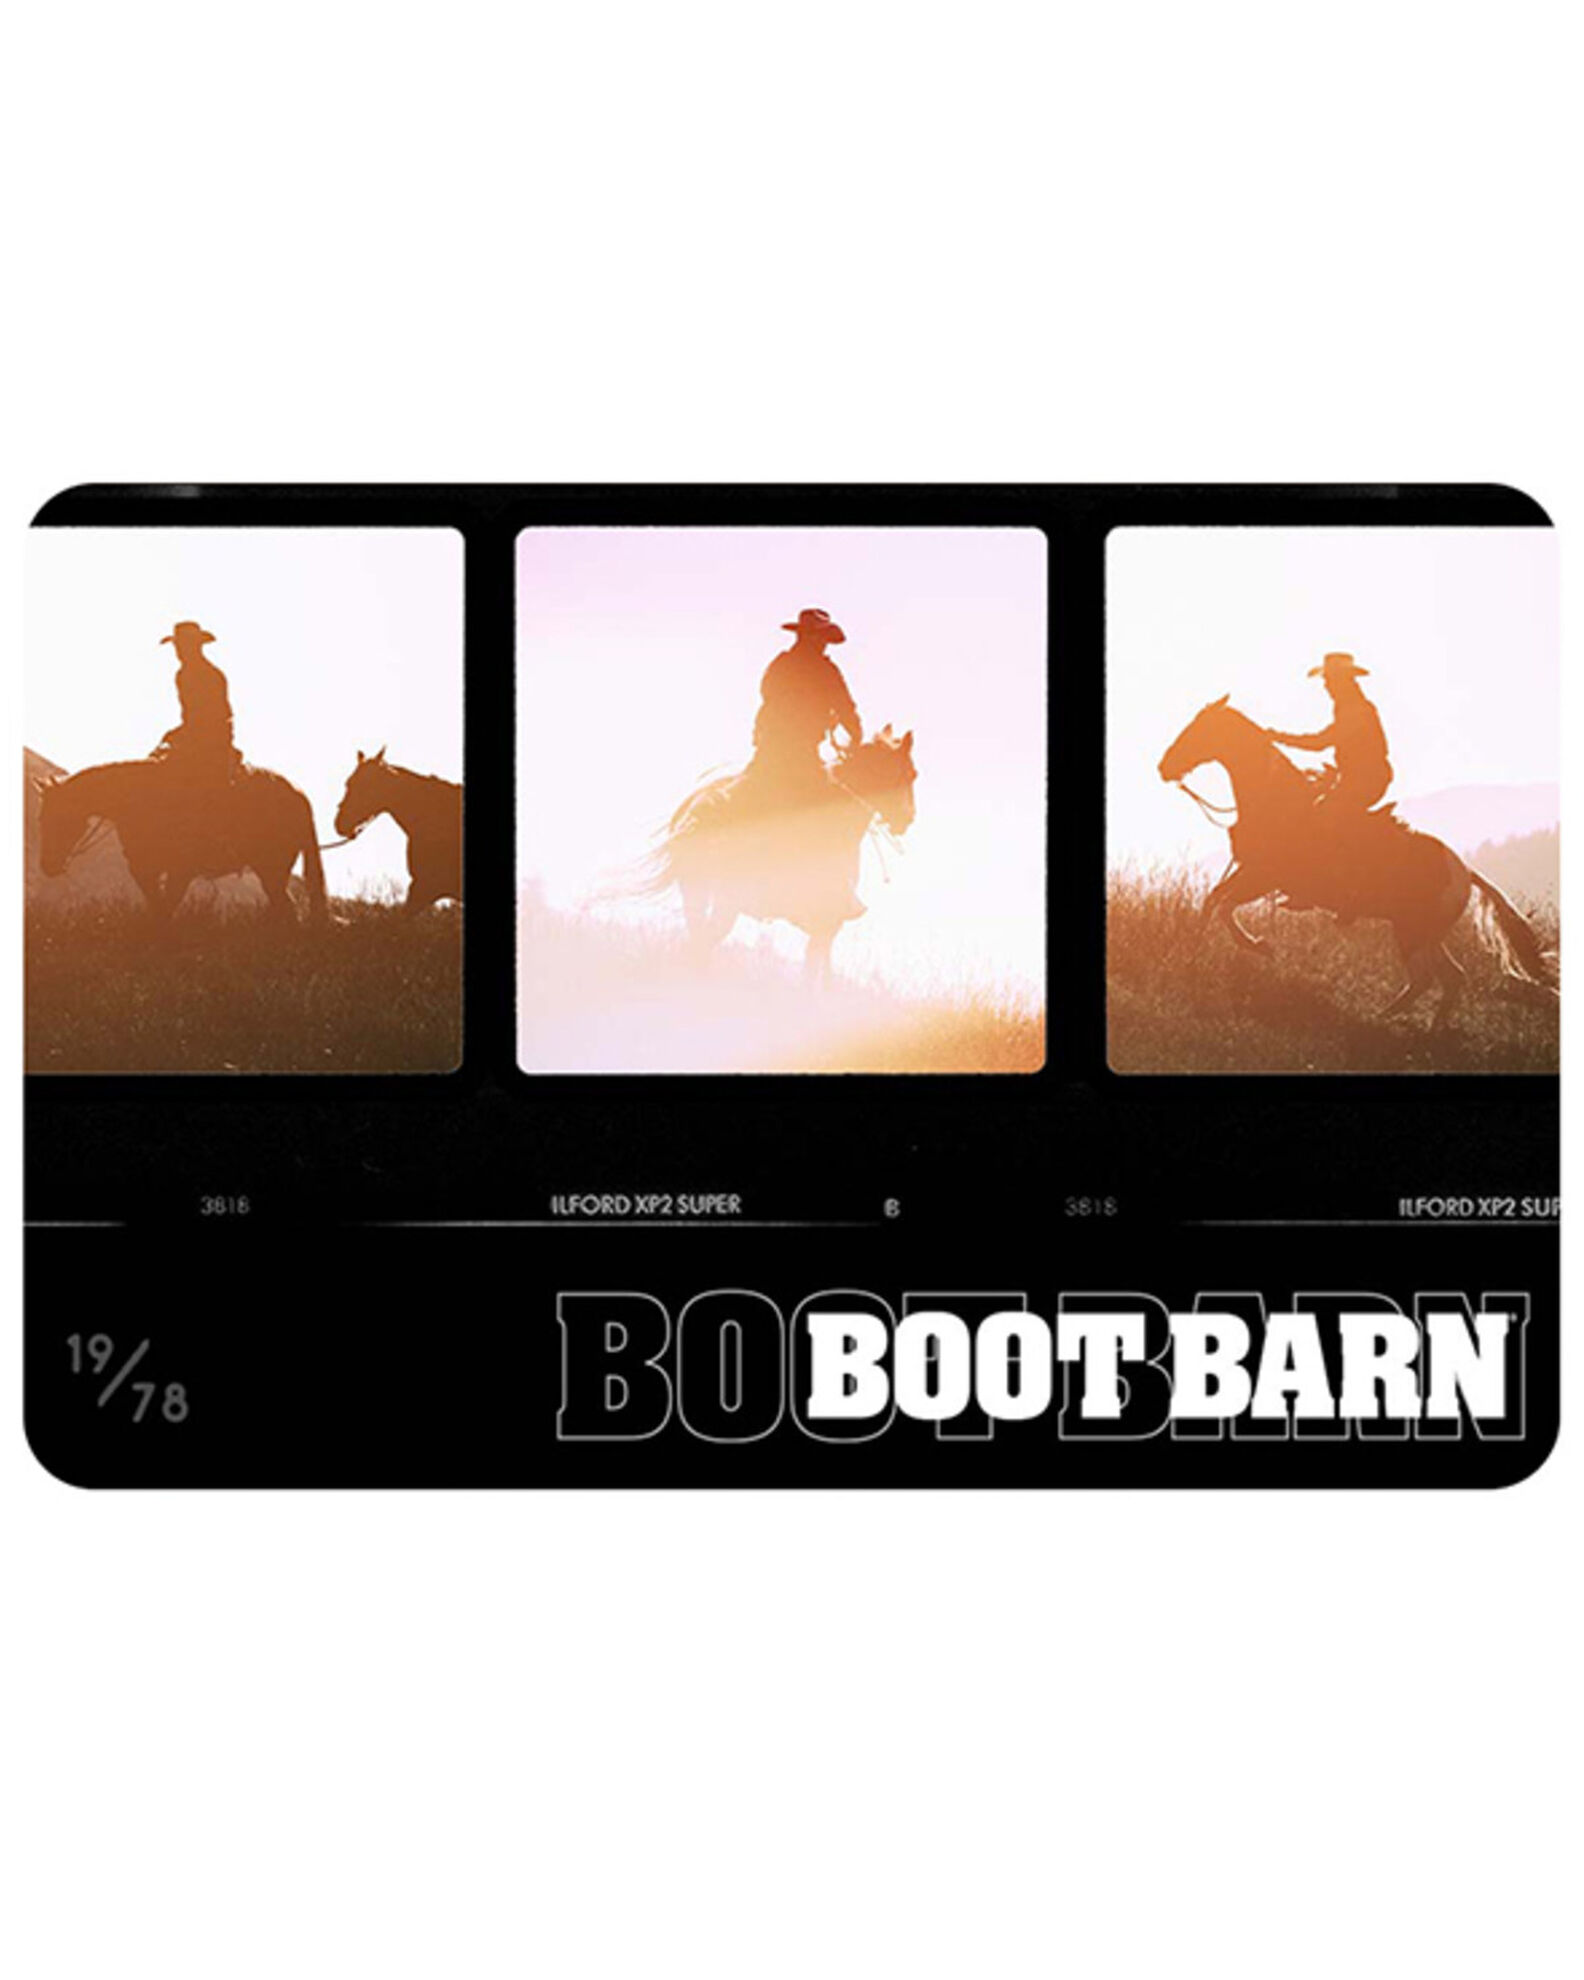 Gift Cards - Boot Barn